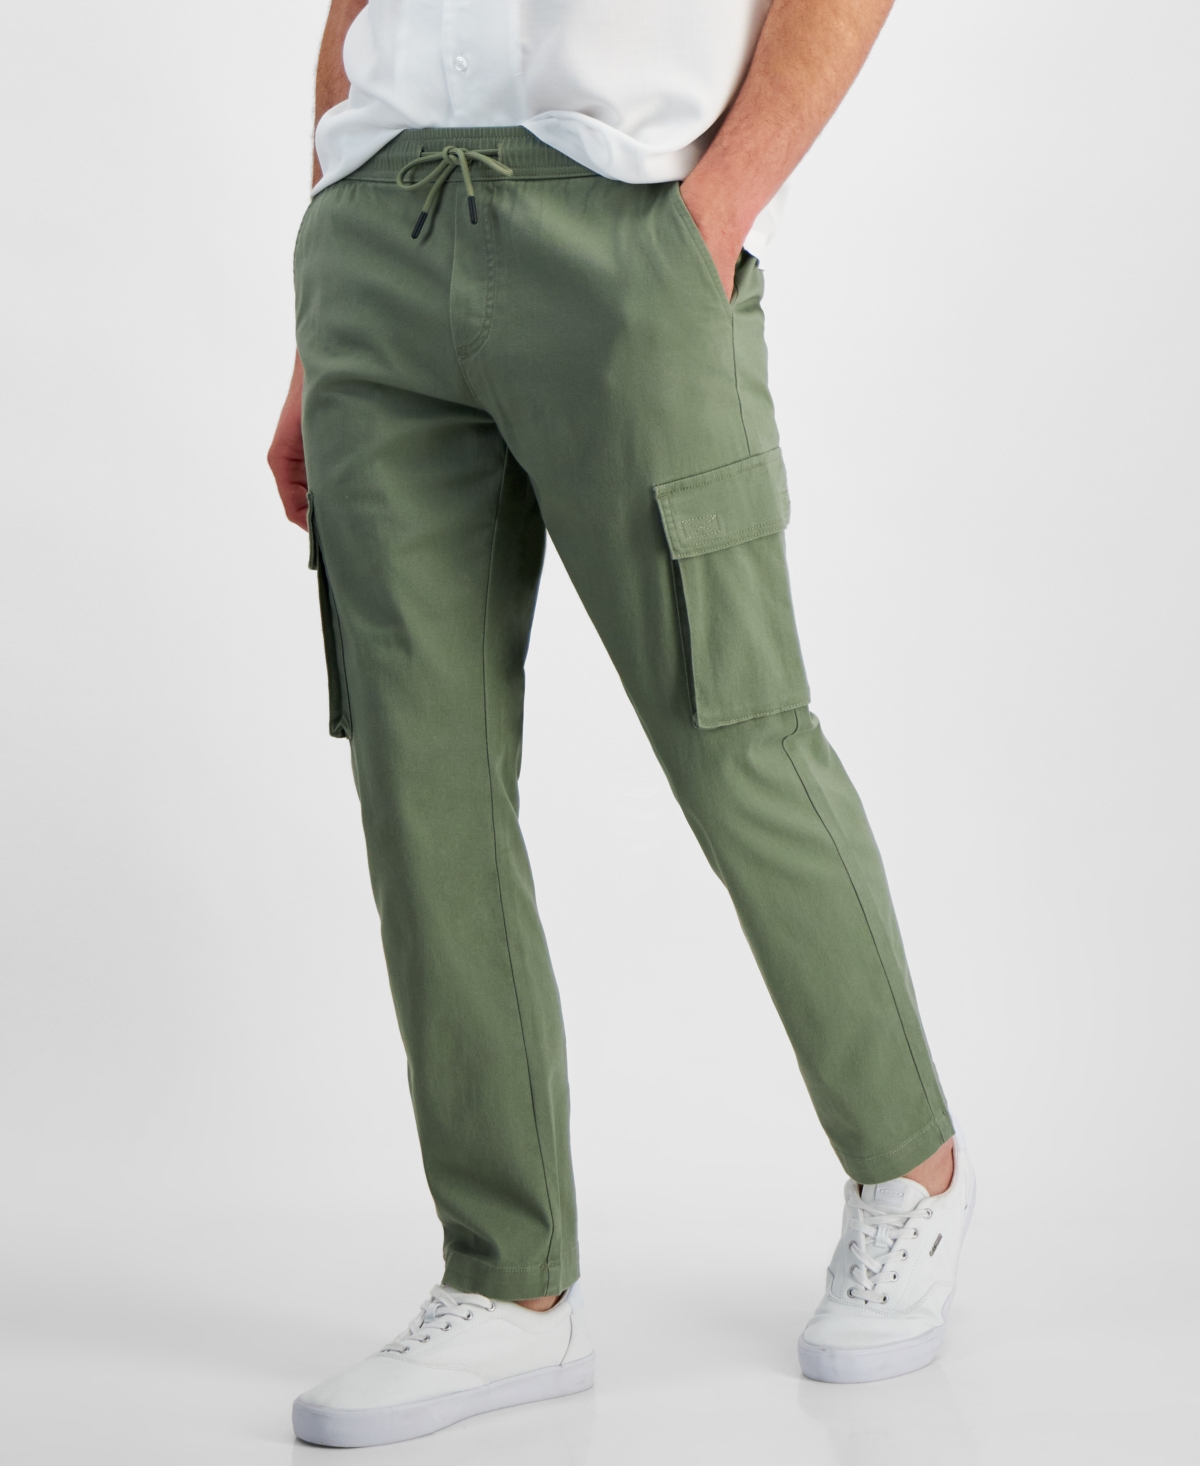 Shop And Now This Men's Regular-fit Twill Drawstring Cargo Pants, Created For Macy's In Green